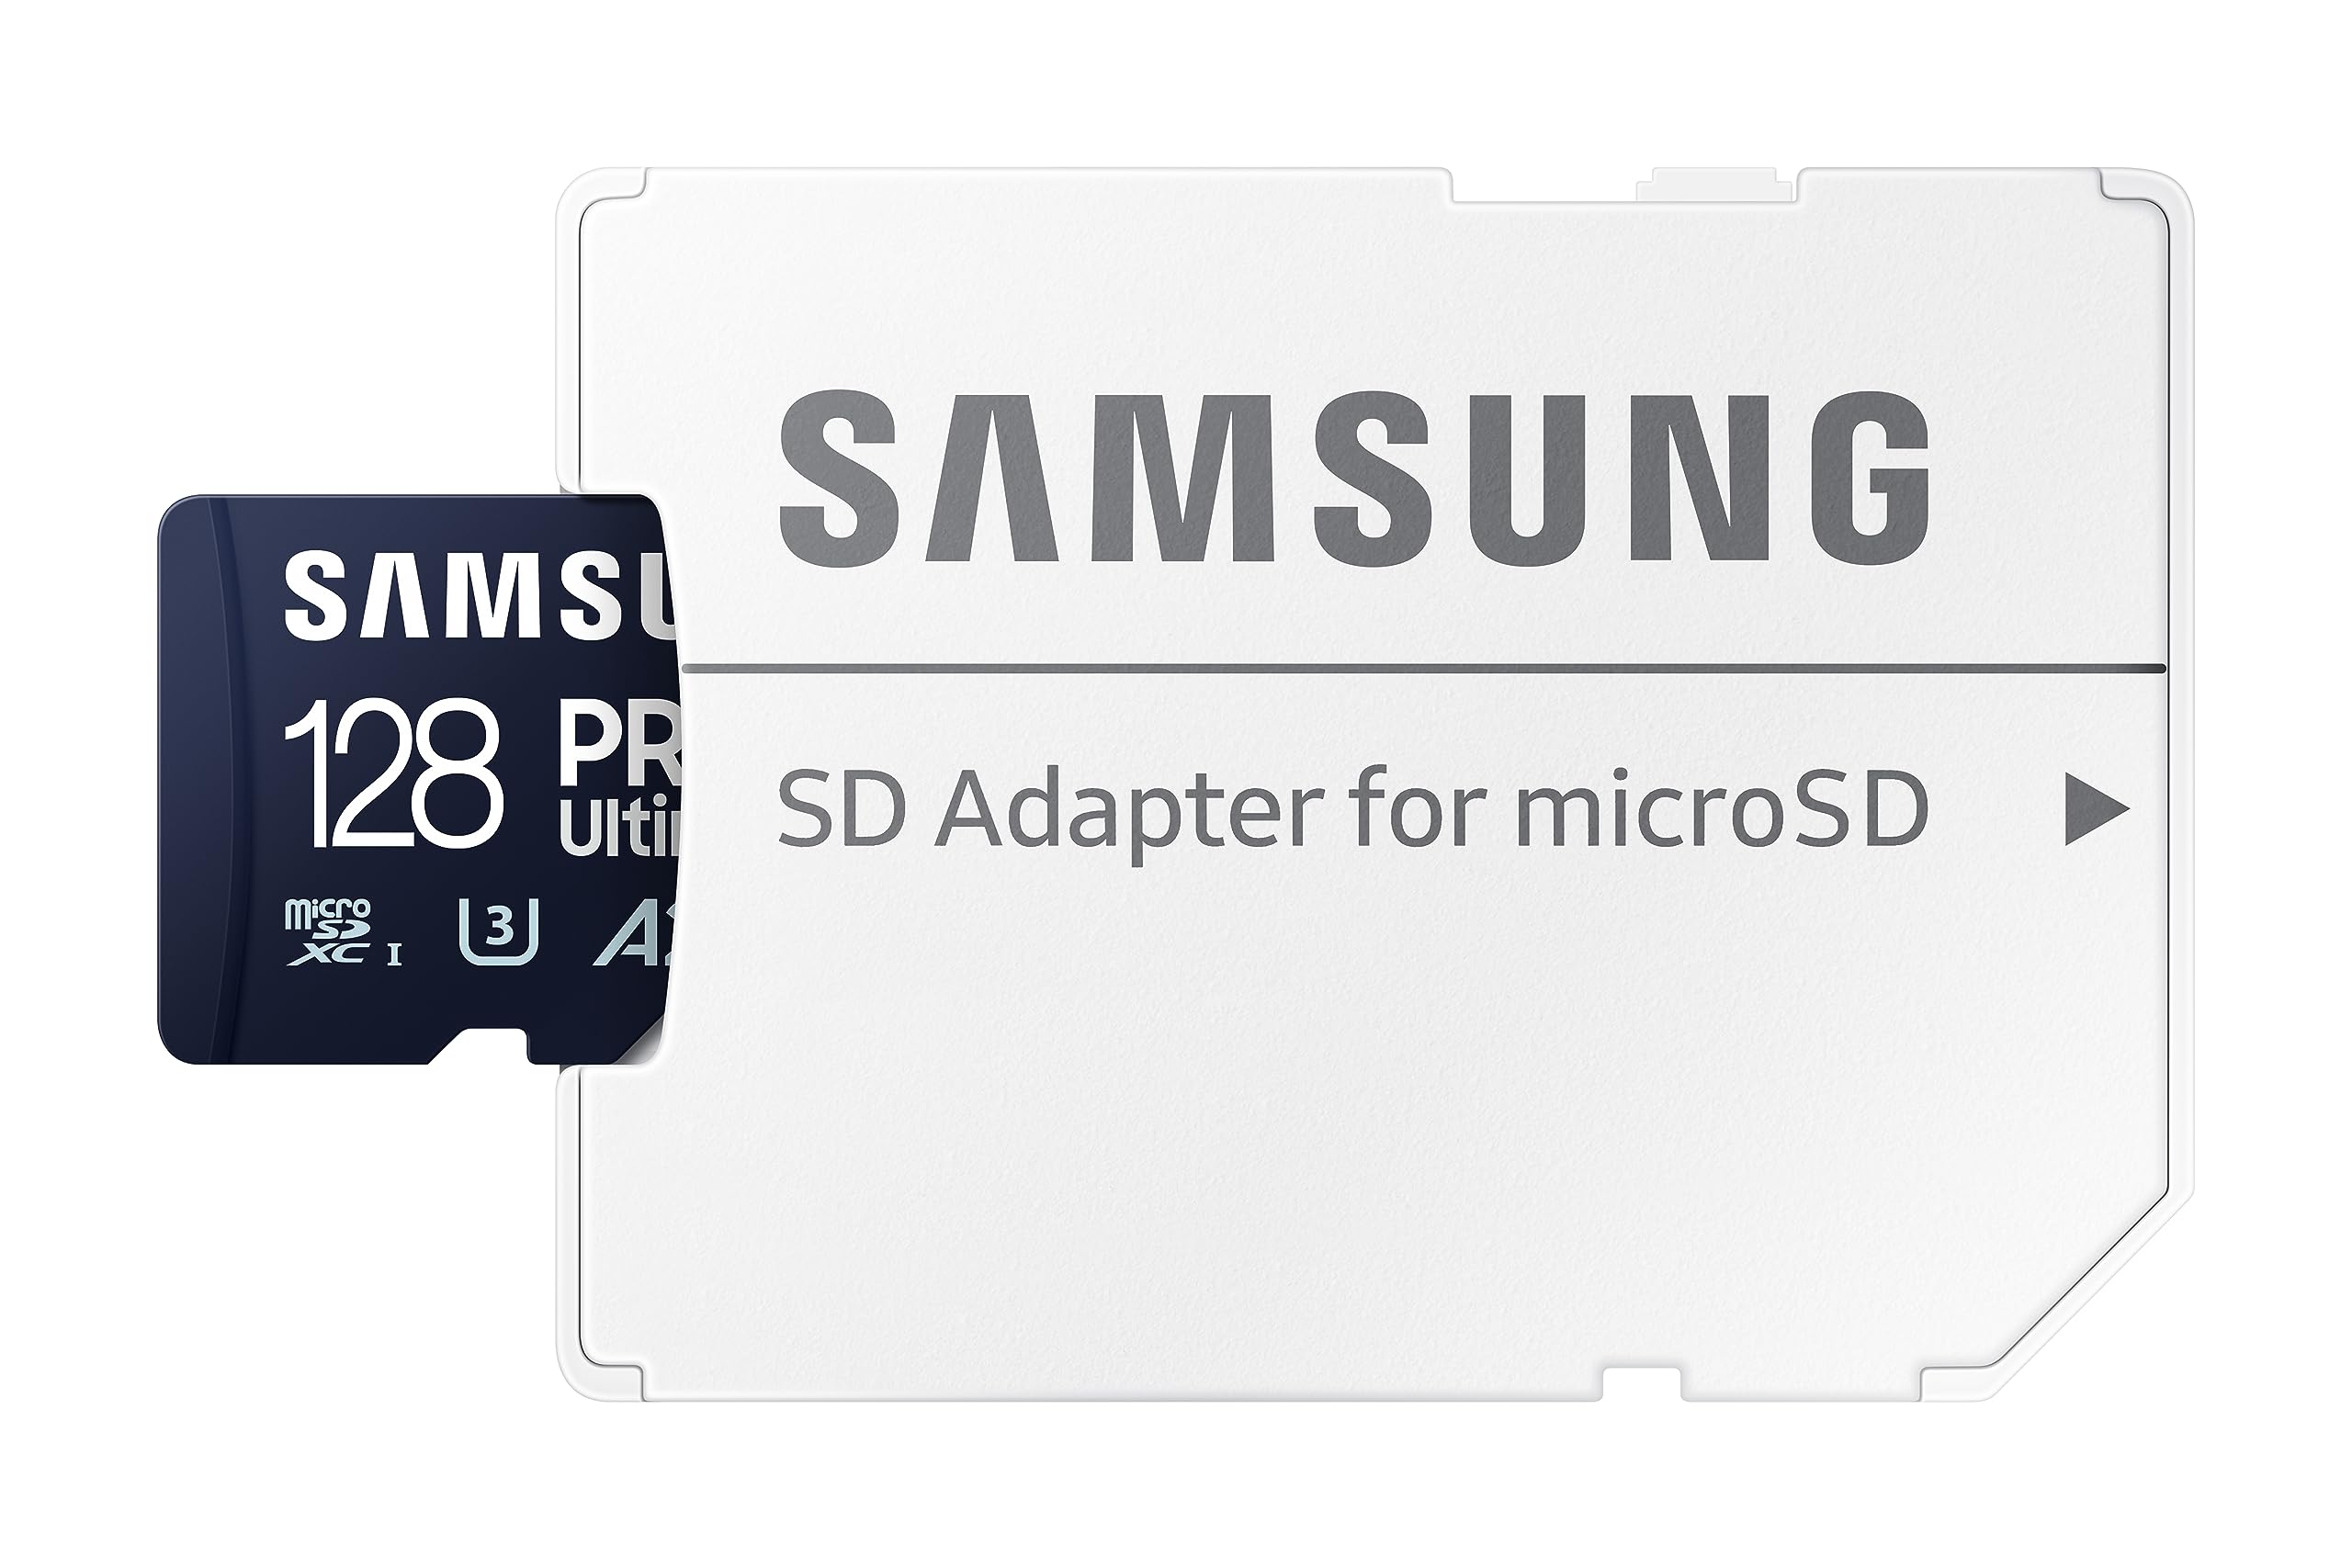 SAMSUNG PRO Ultimate microSD Memory Card + Adapter, 128GB microSDXC, Up to 200 MB/s, 4K UHD, UHS-I, Class 10, U3,V30, A2 for GoPRO Action Cam, DJI Drone, Gaming, Phones, Tablets, MB-MY128SA/AM